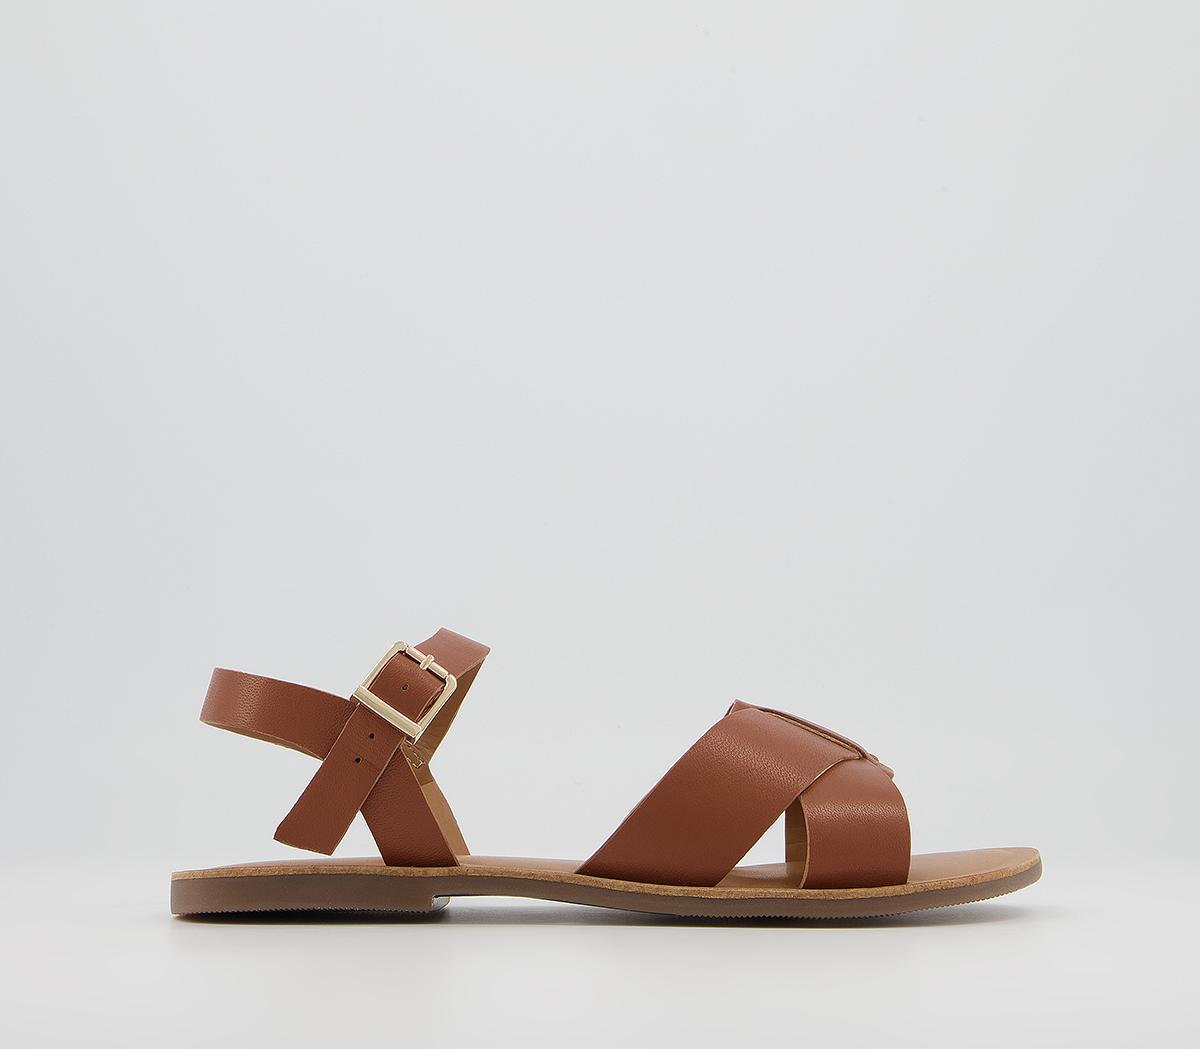 OFFICE Smooth Two Part Sandals Tan Leather - Women’s Sandals